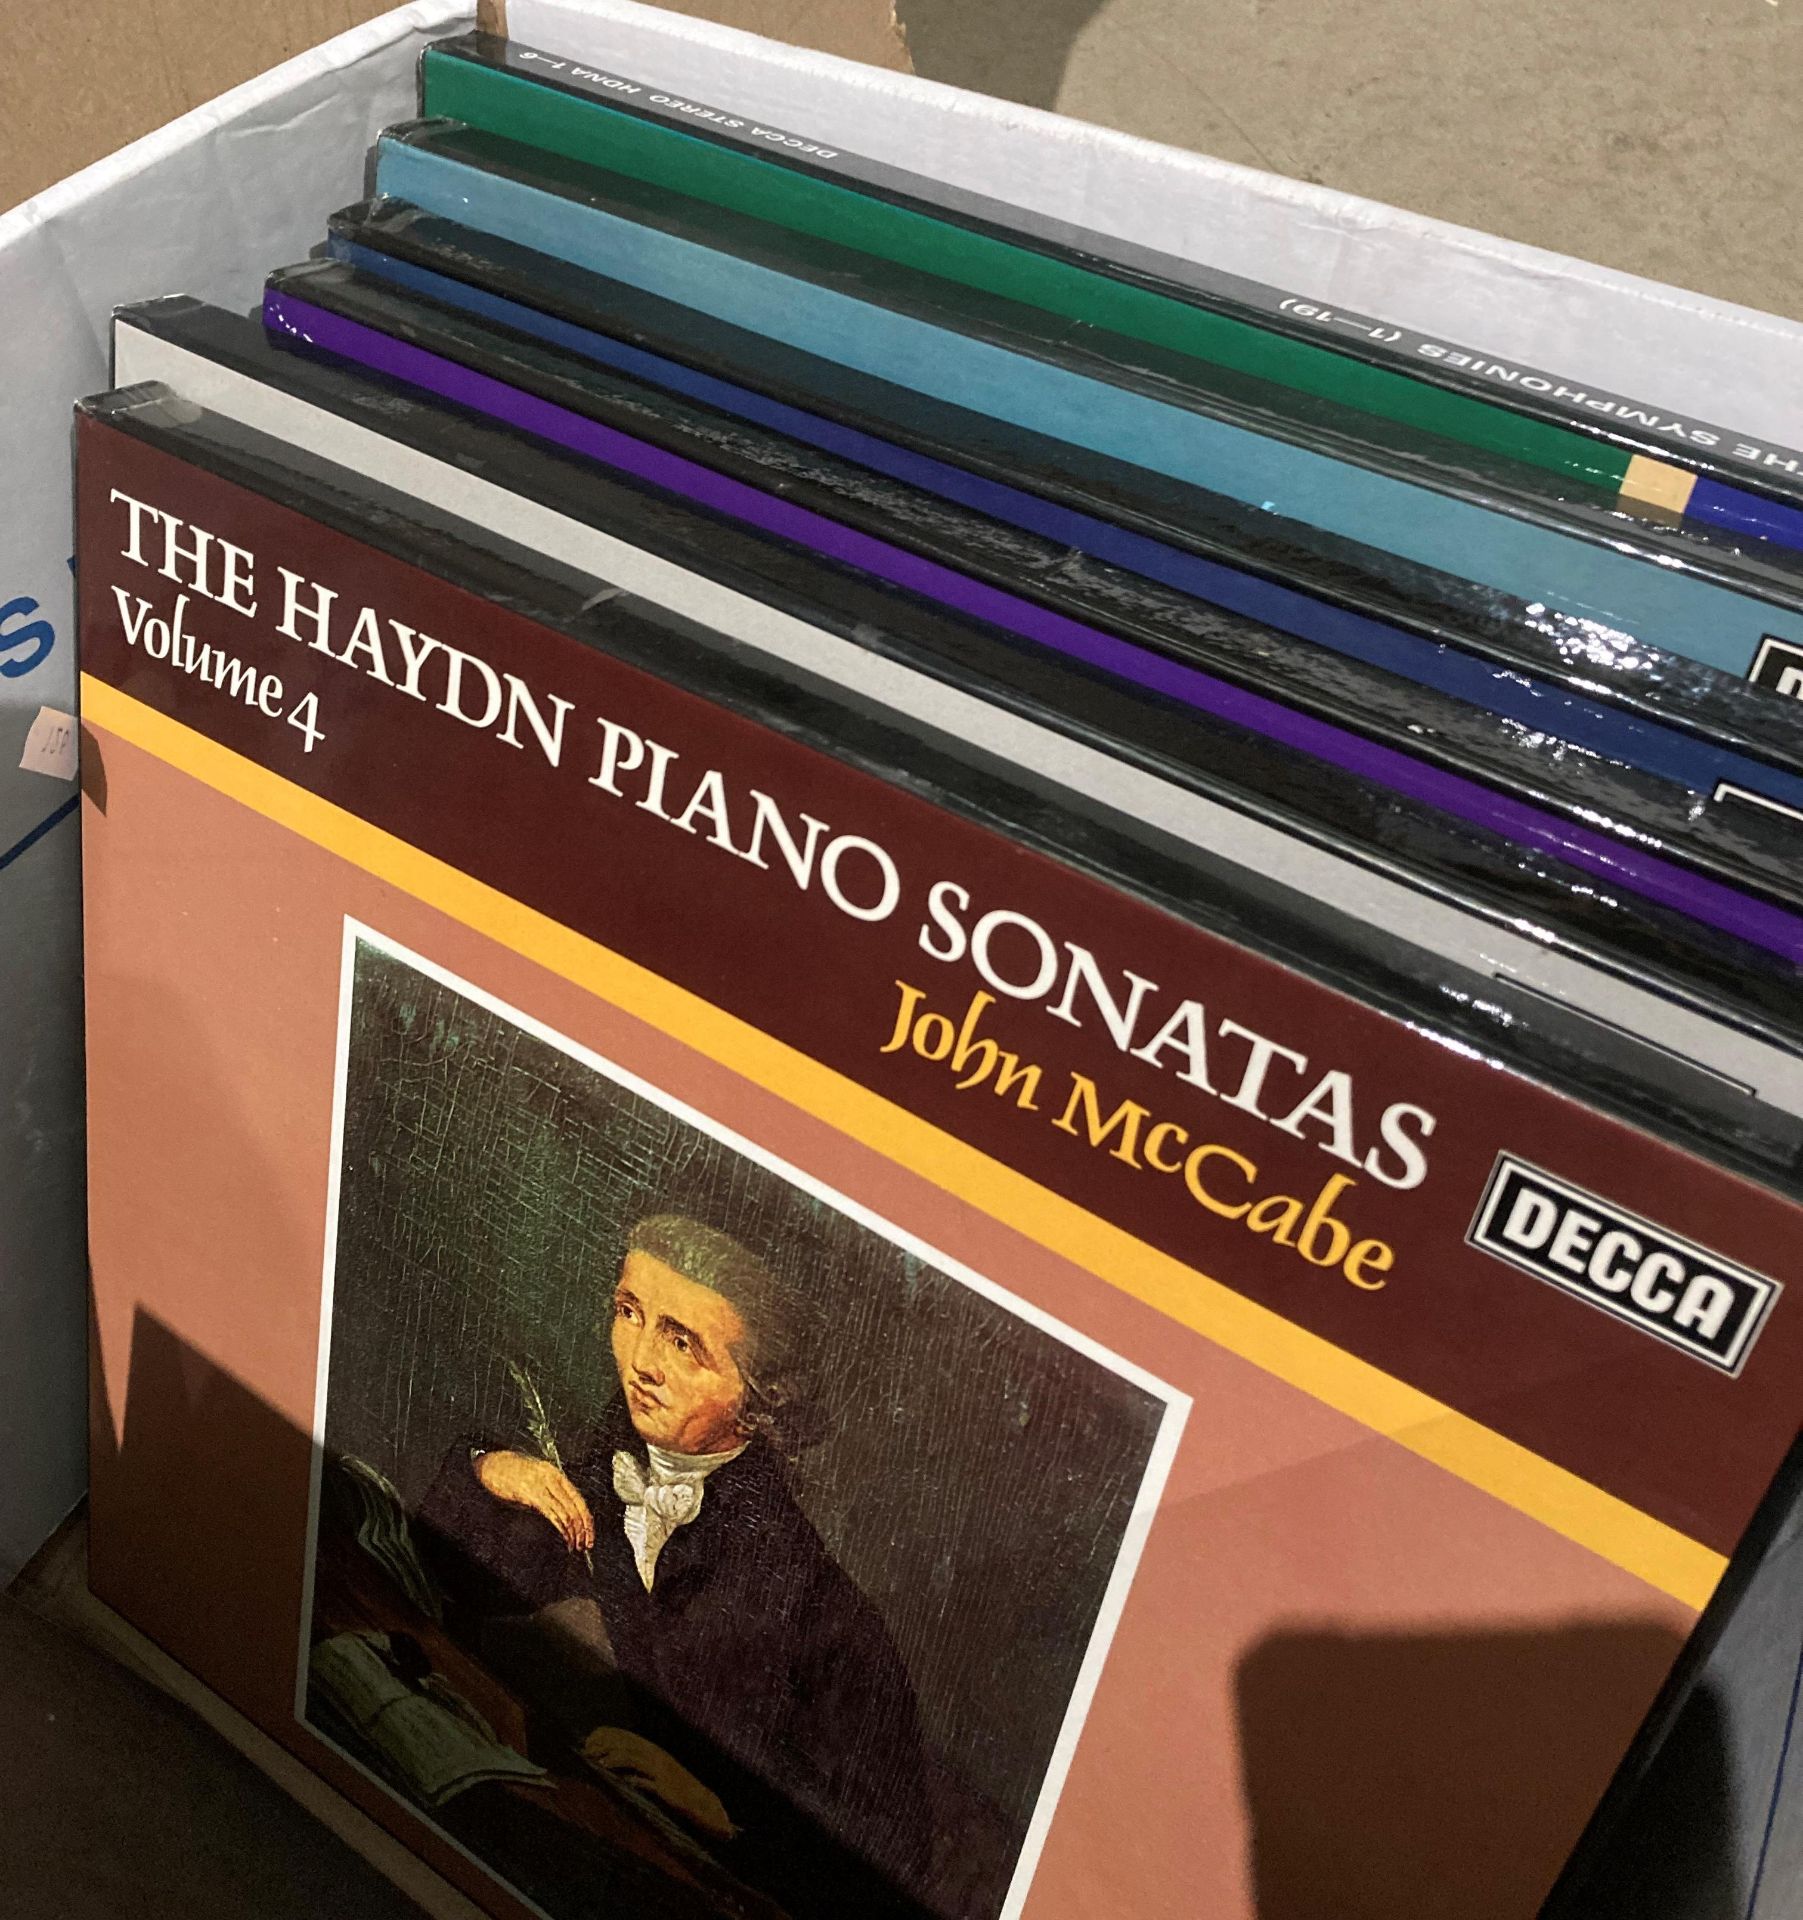 Contents to two boxes - 28 assorted classical LP box sets including Hayden, Chopin, Dvorak, Handel, - Image 4 of 4